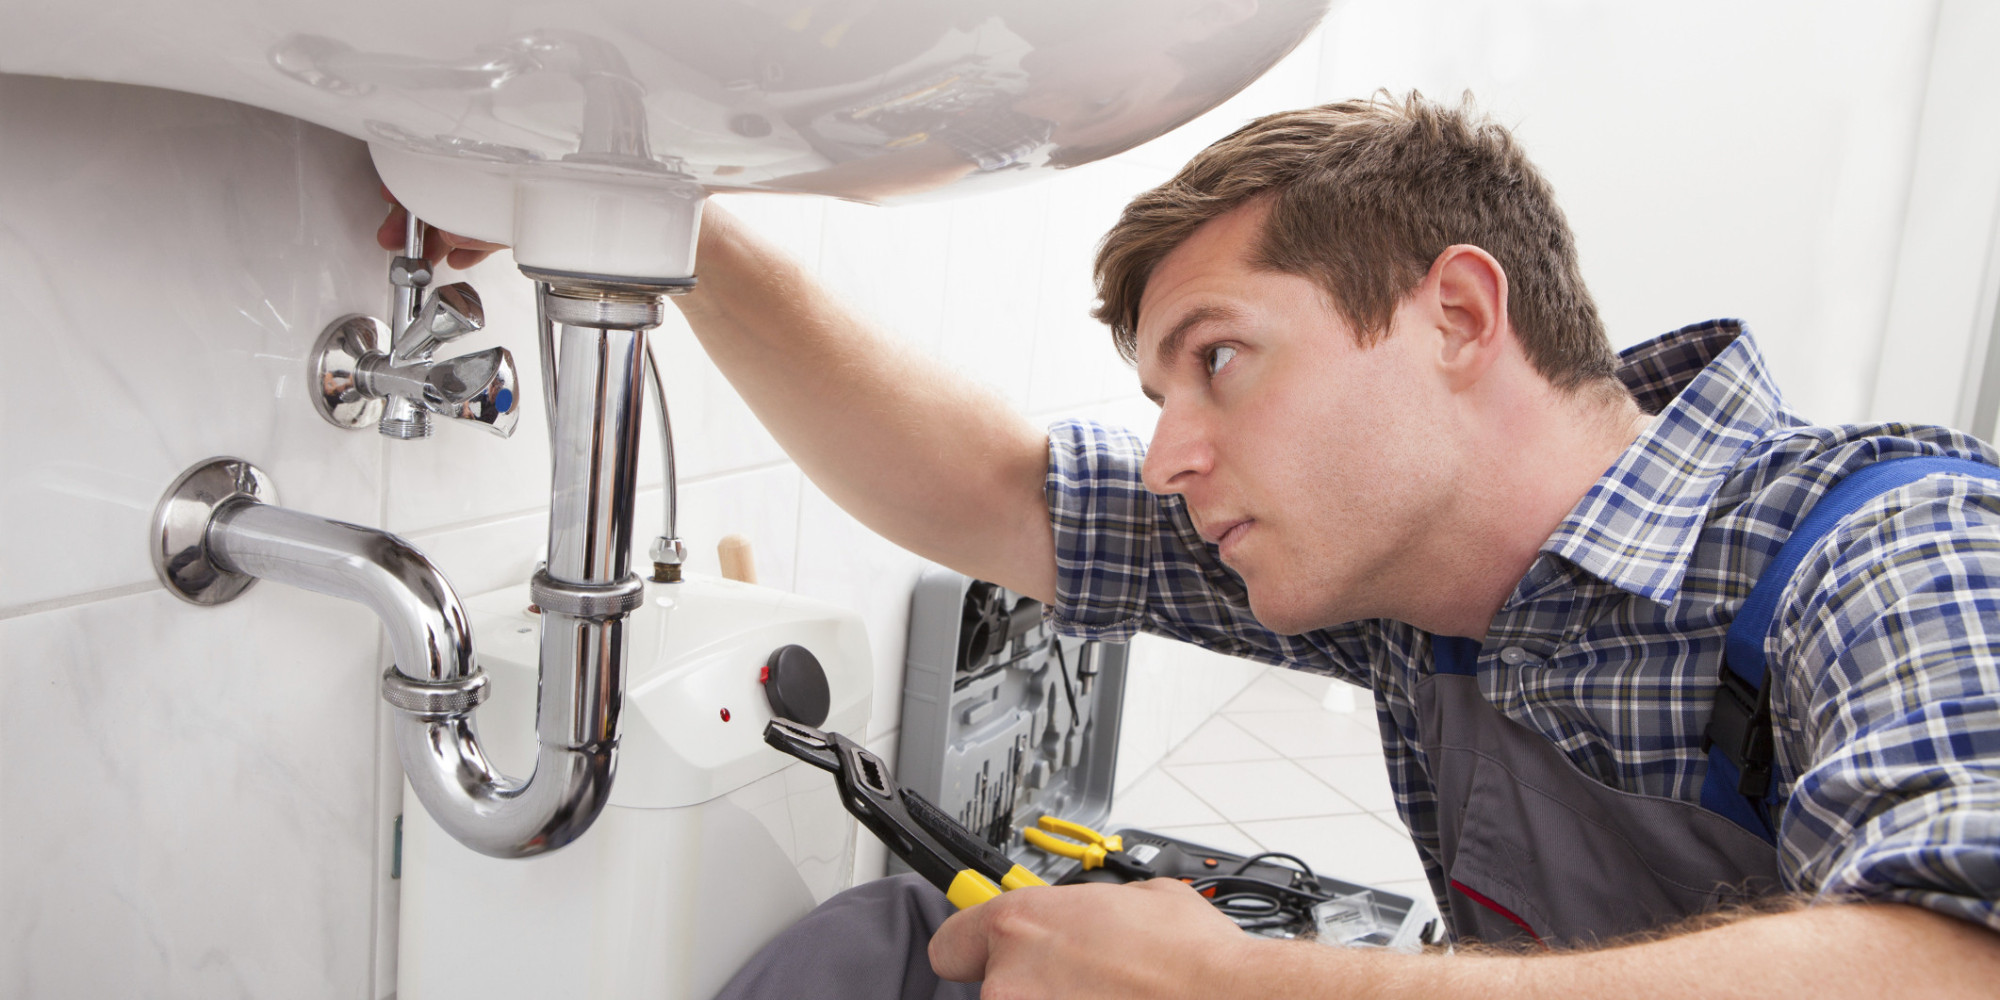 Tips For Hiring a Plumber For Your Bathroom and Kitchen